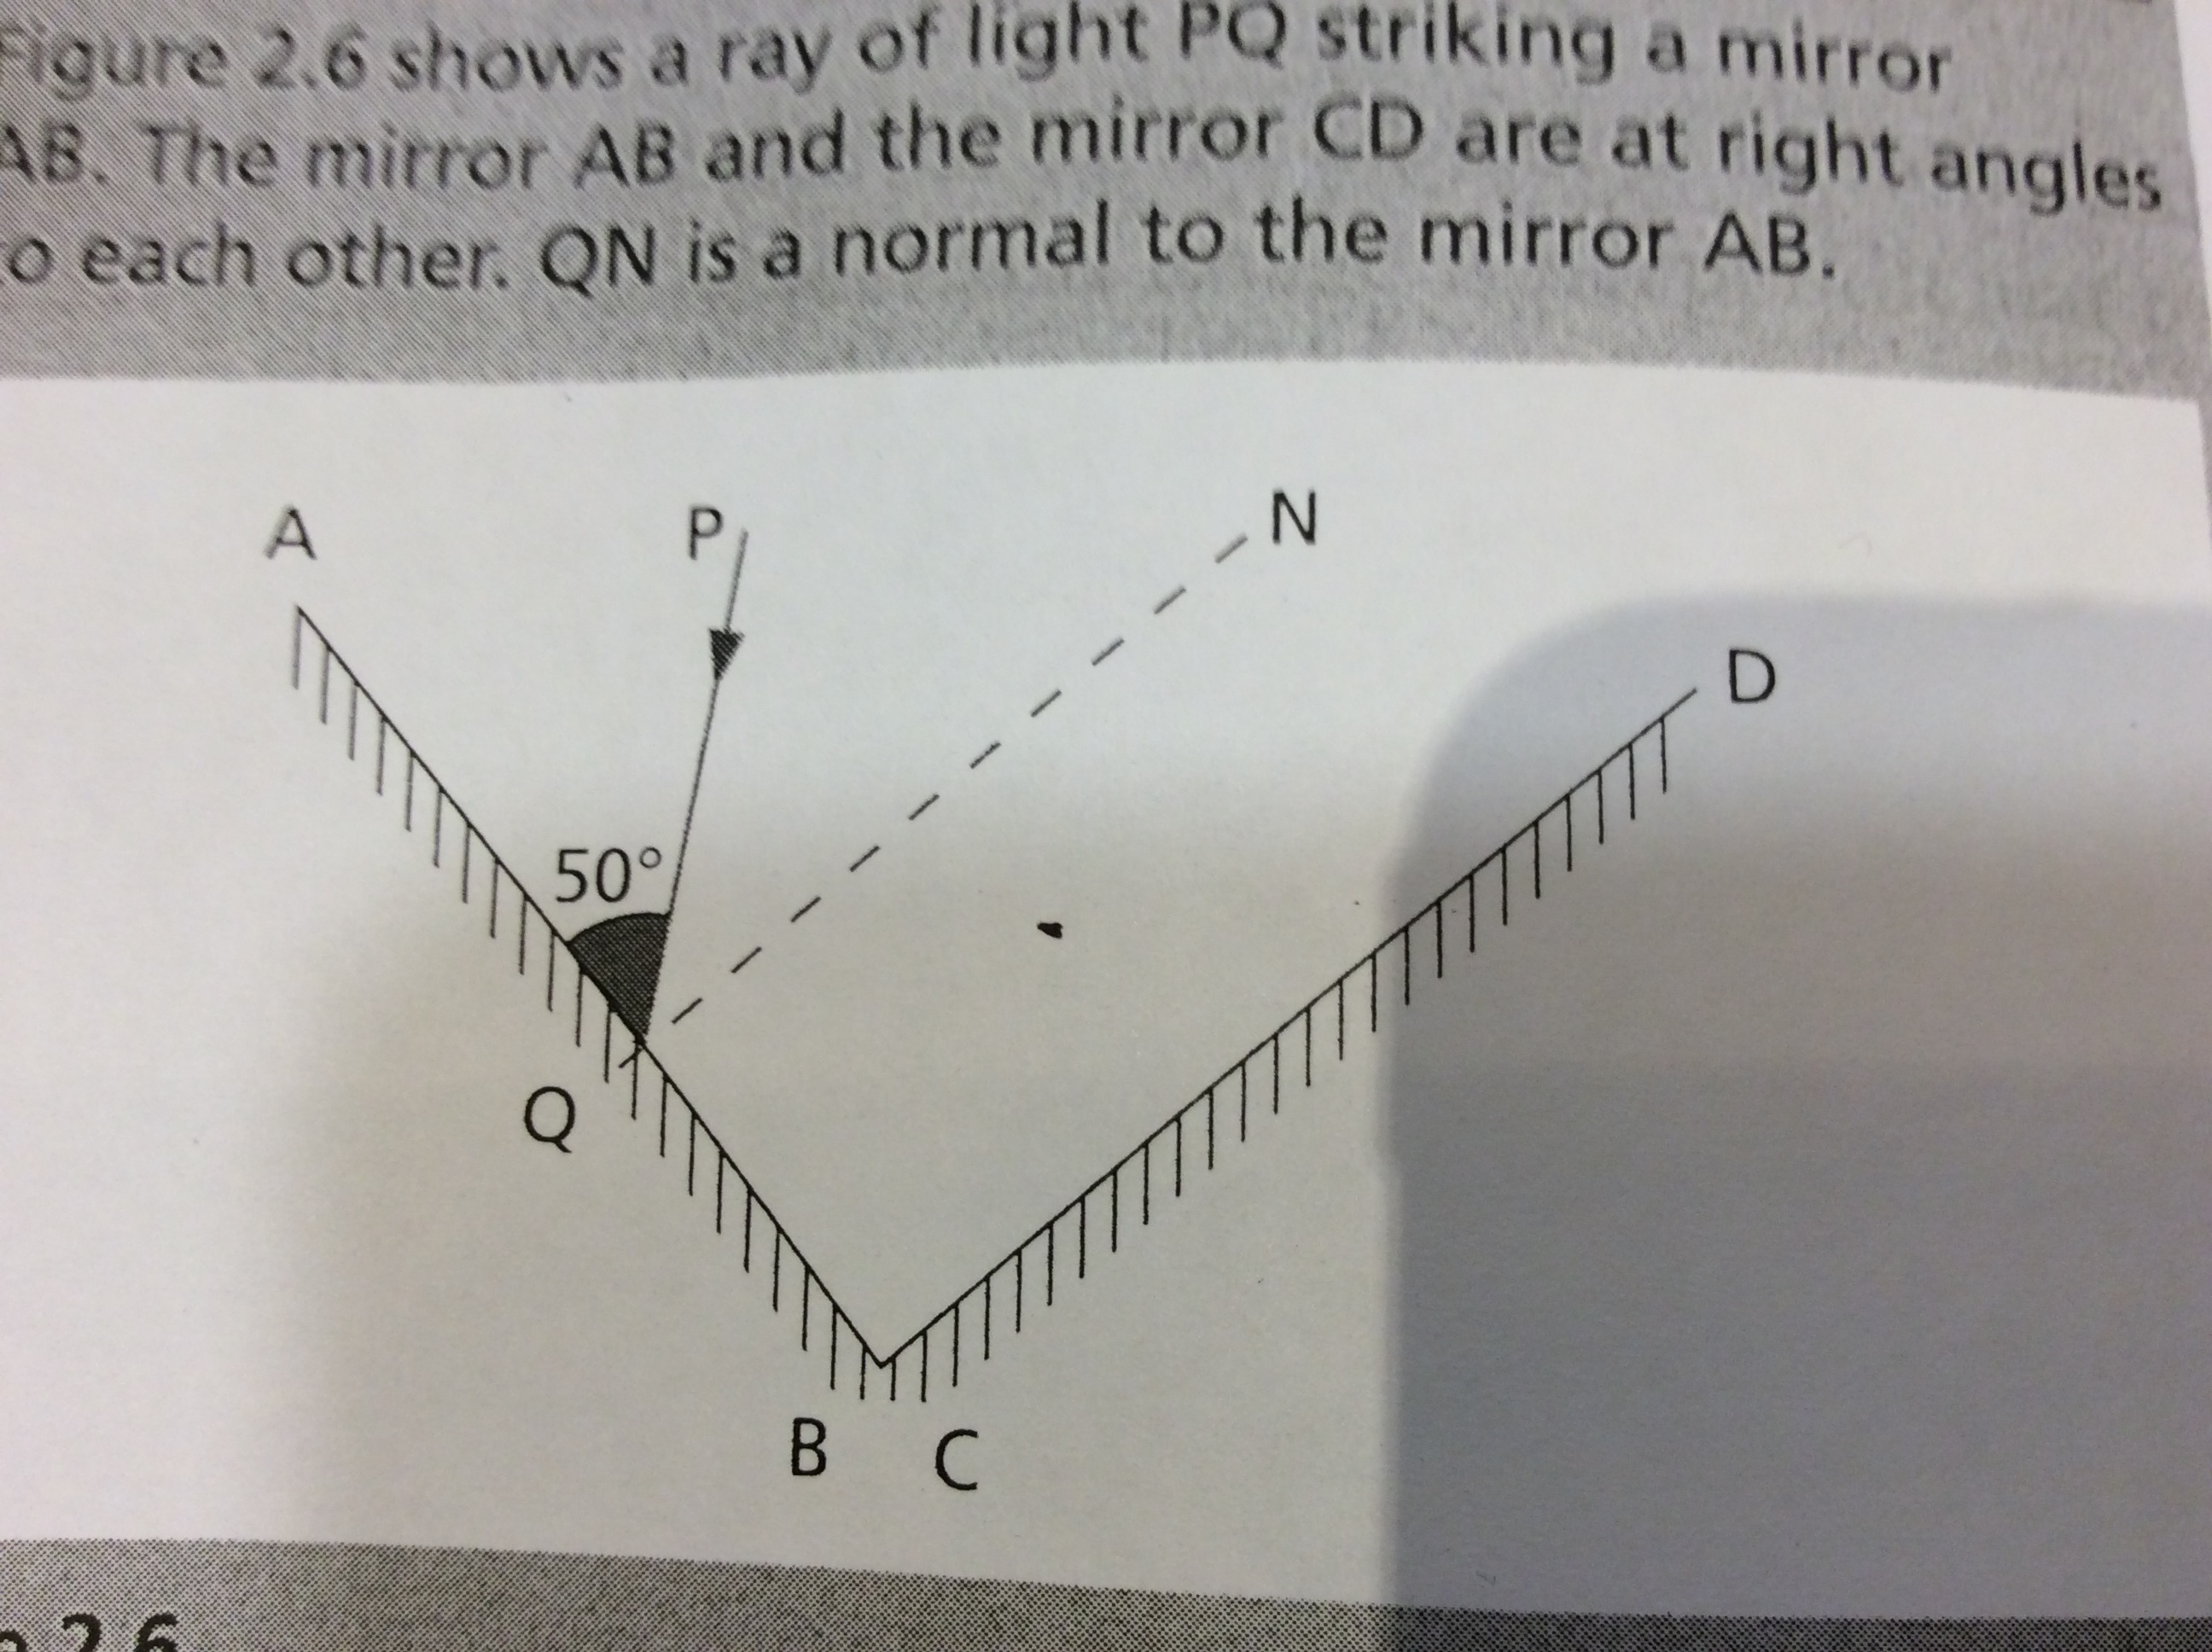 Figure 2.6 shows a ray of light PQ striking a mirror
AB. The mirror AB and the mirror CD are at right angles
Co each other. ON is a normal to the mirror AB.
50°
B C
